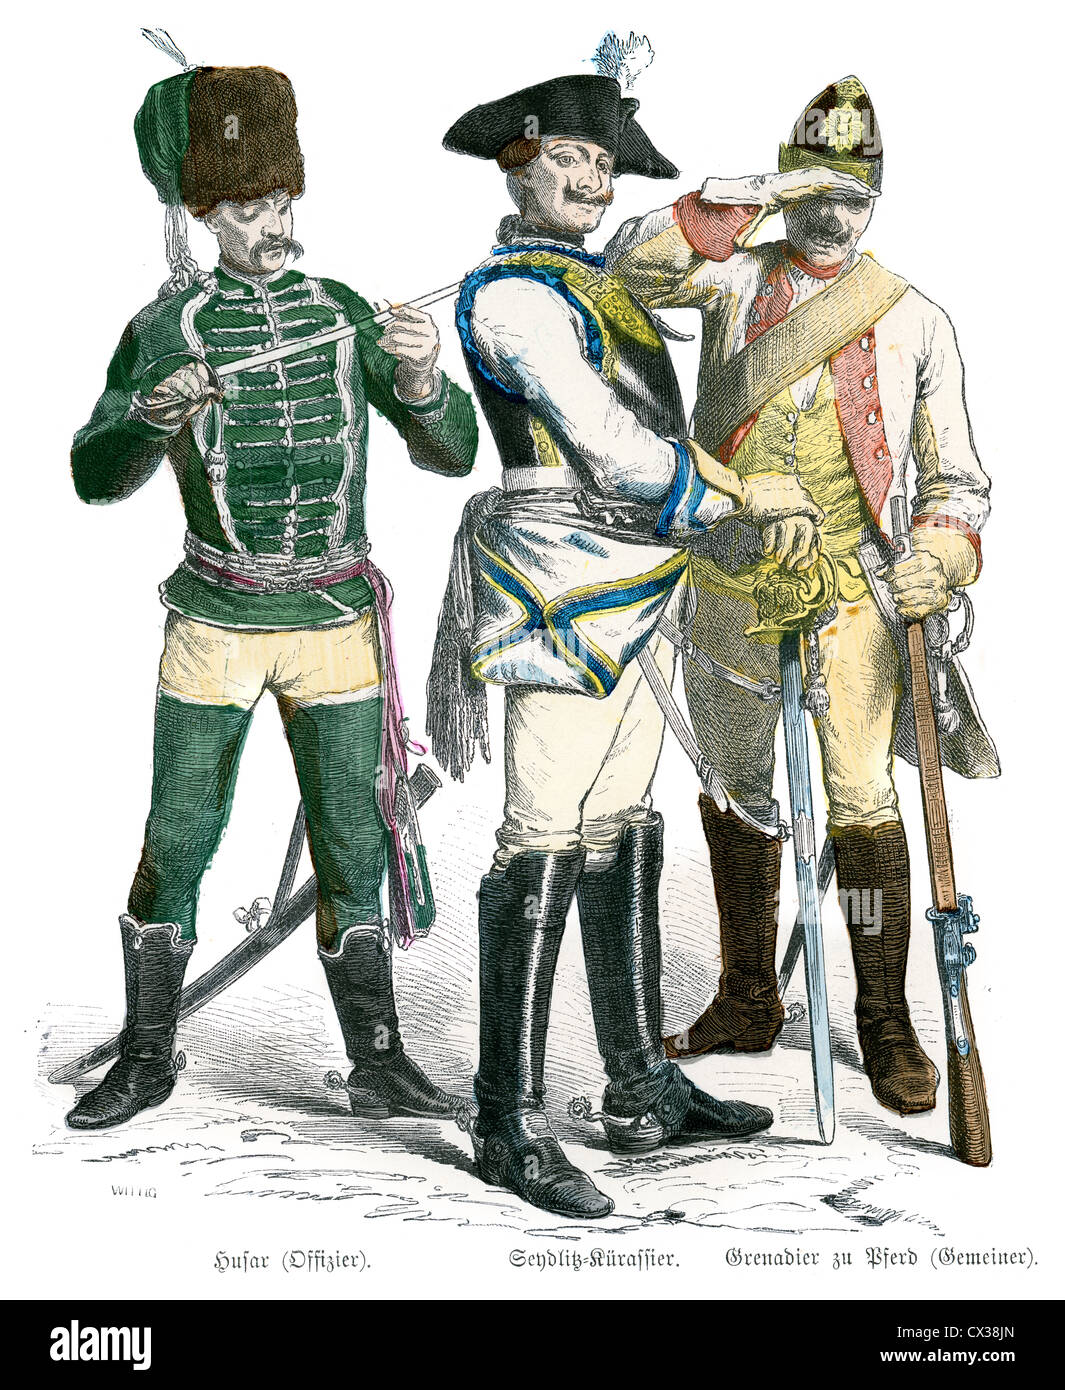 Prussian Hussar Officer, Seydlitz Cuirassier and Horse Grenadier from the 18th Century, circa 1770 Stock Photo